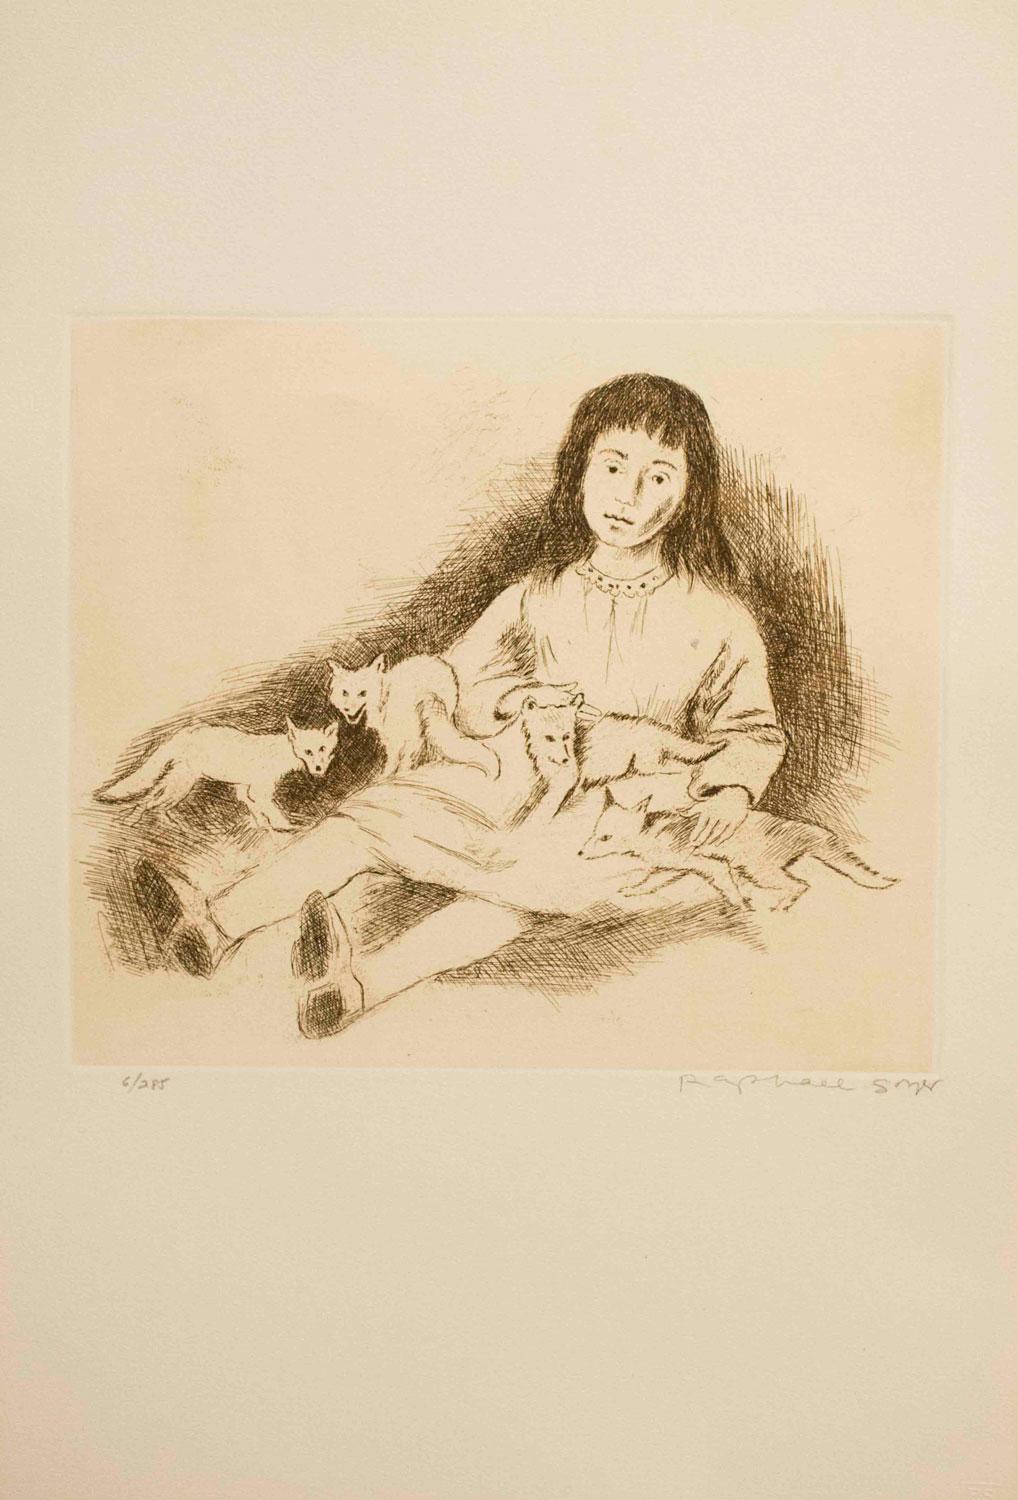 Raphael Soyer Animal Print - Girl with Foxes